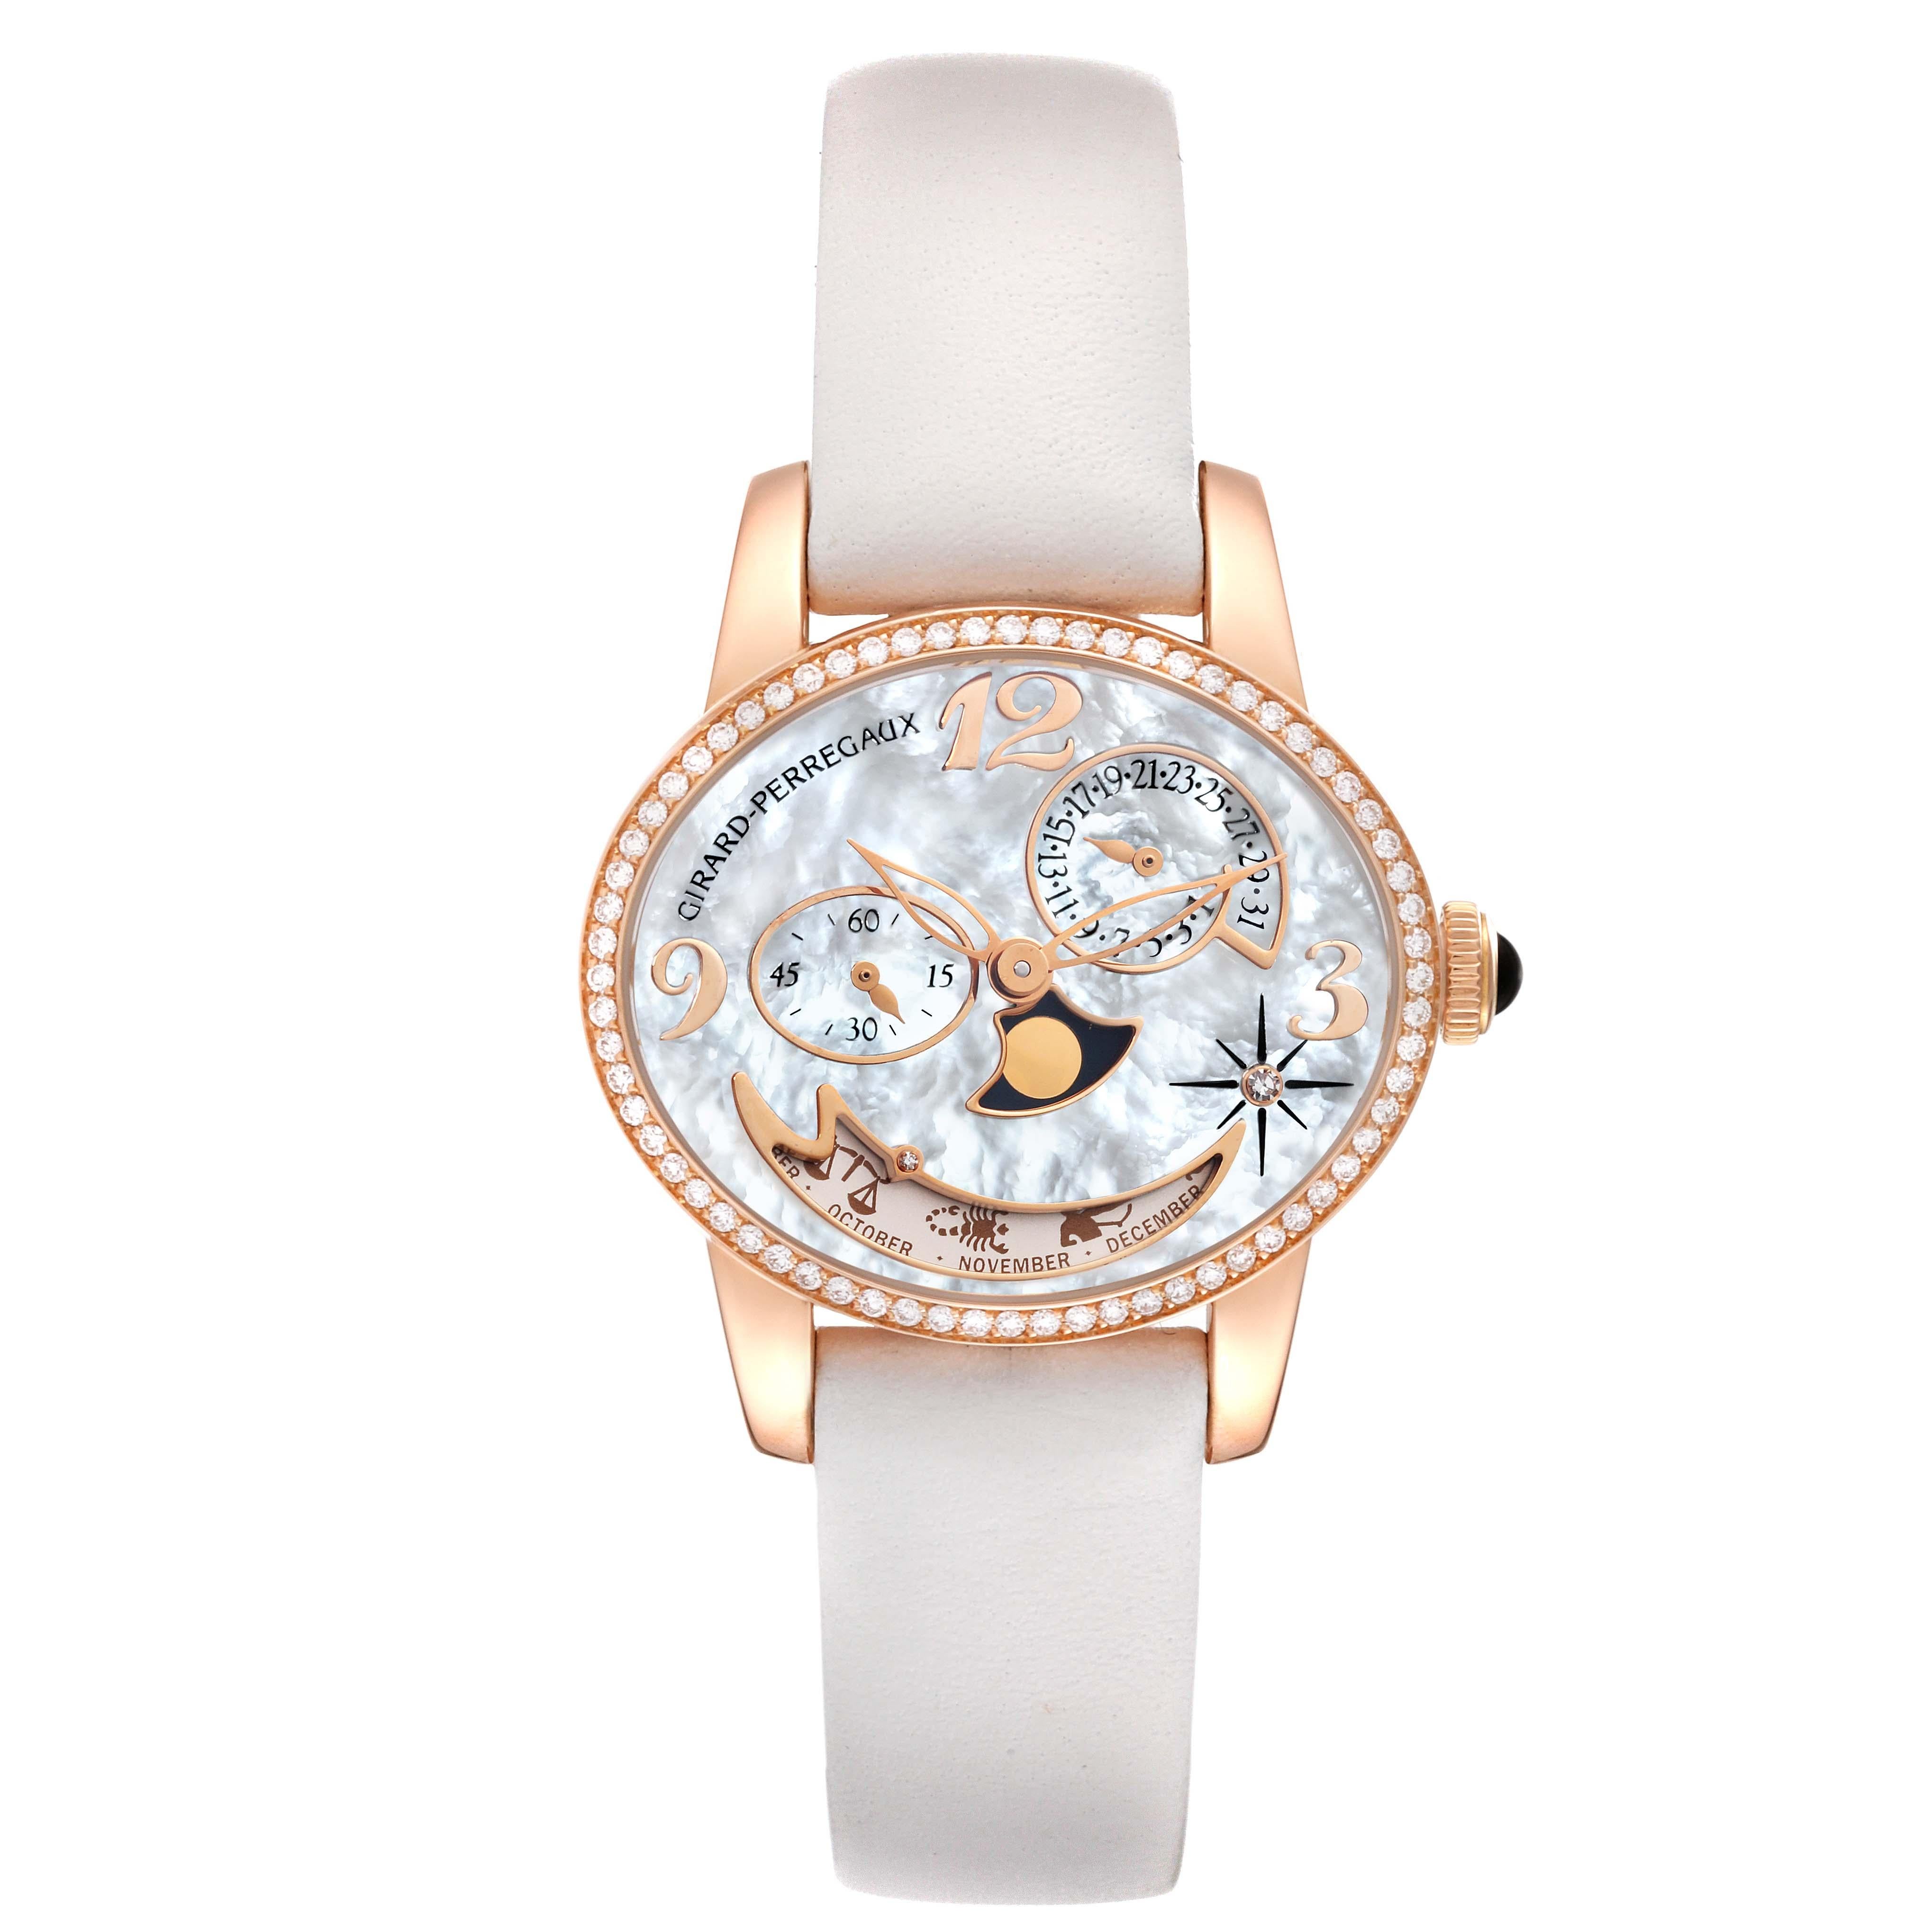 Girard Perregaux Cat's Eye Rose Gold Mother Of Pearl Diamond Ladies Watch 80483 In Excellent Condition For Sale In Atlanta, GA